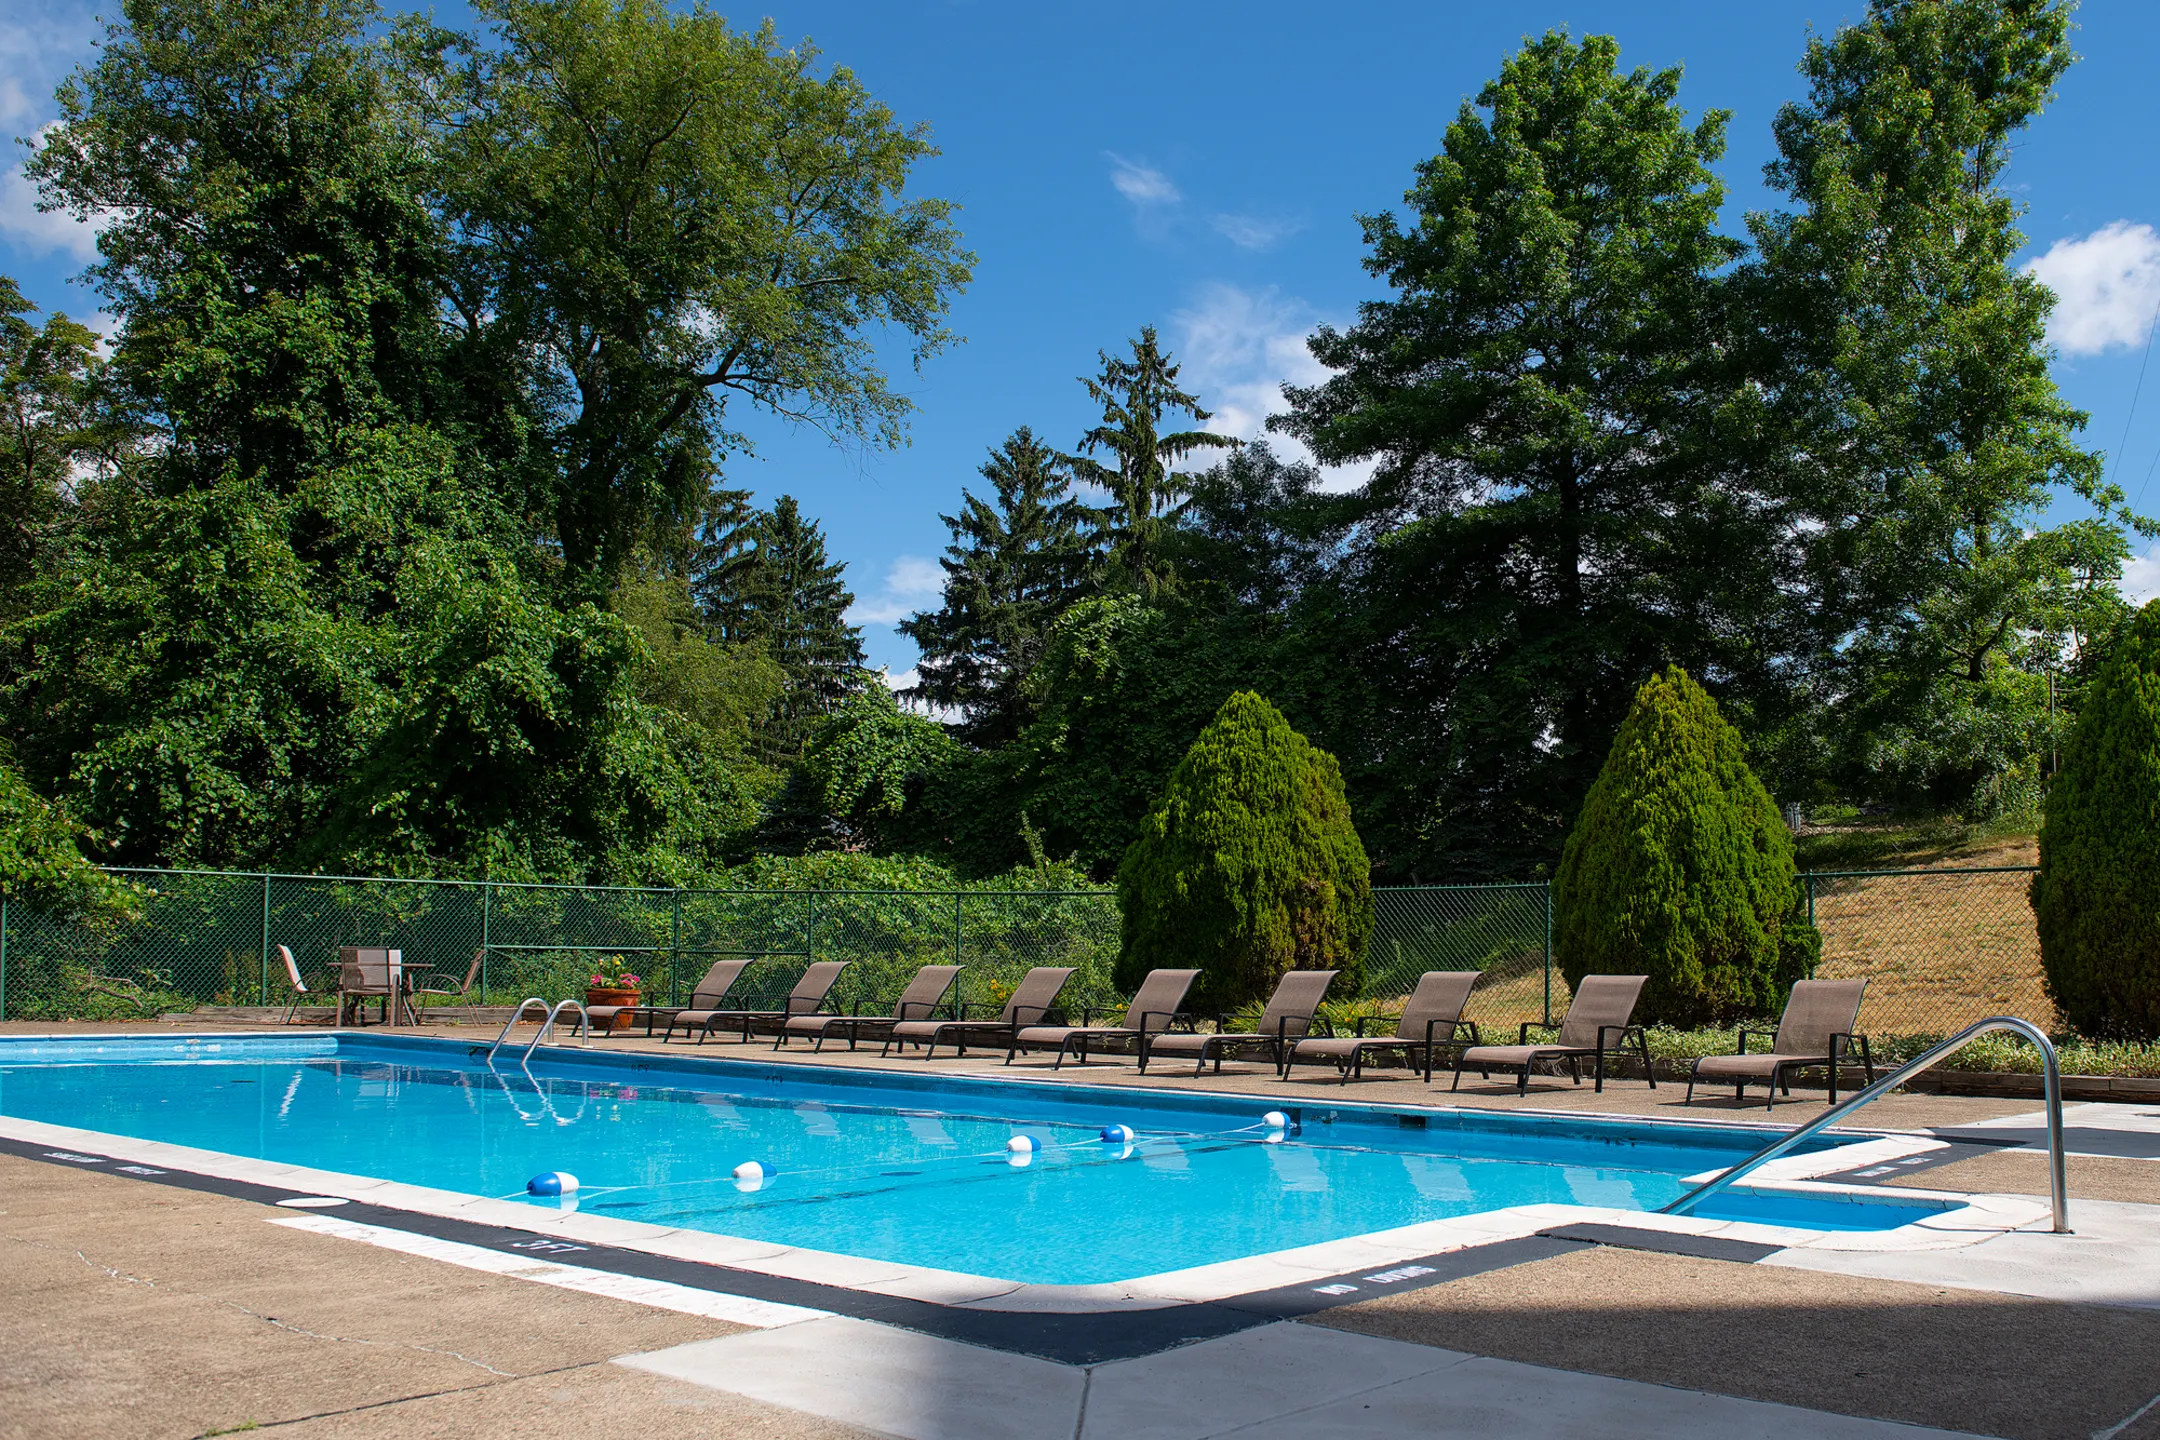 Pool - Monroeville Apartments at LaVale Apartments - Monroeville, PA